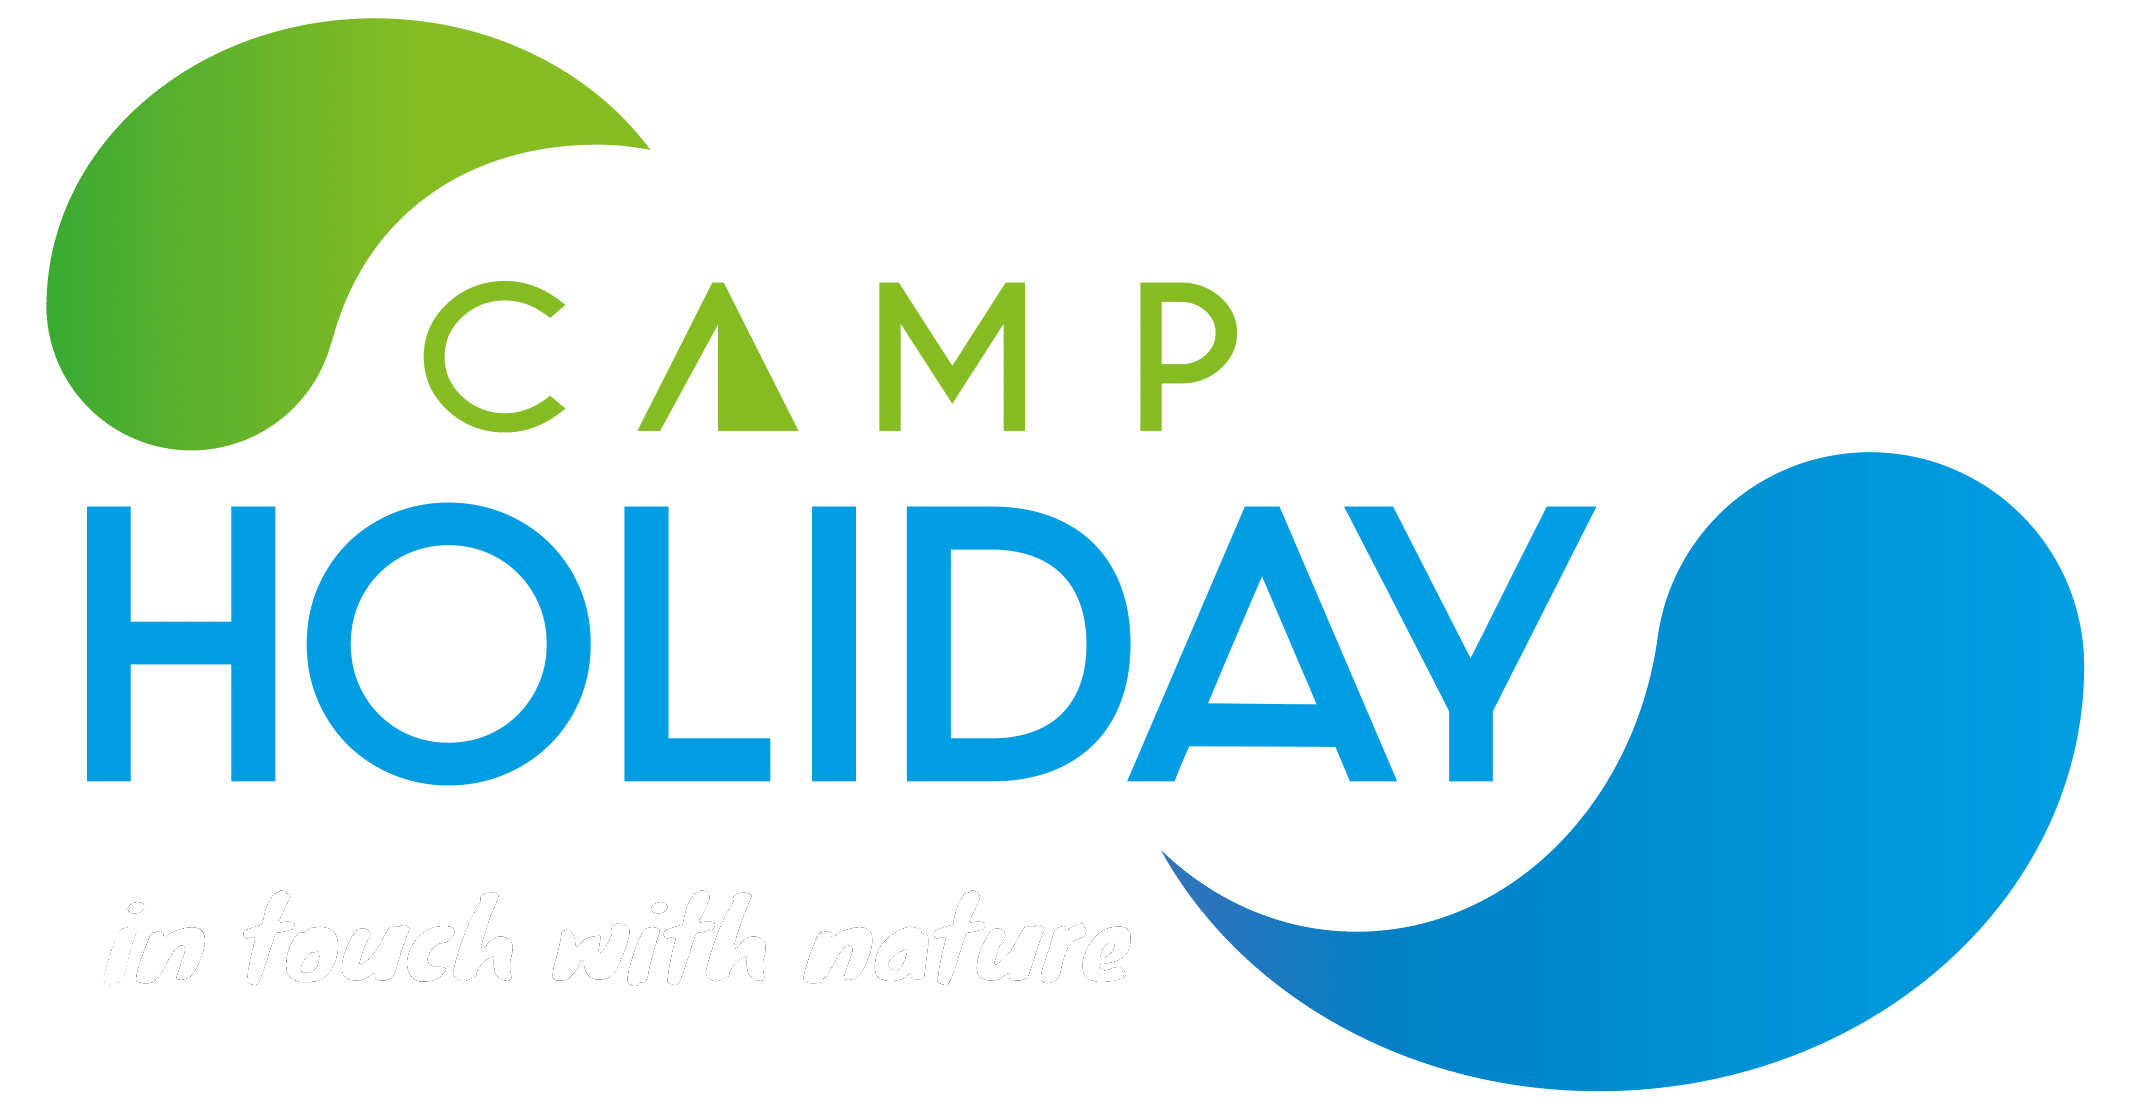 Camp Holiday Hvar - In touch with nature